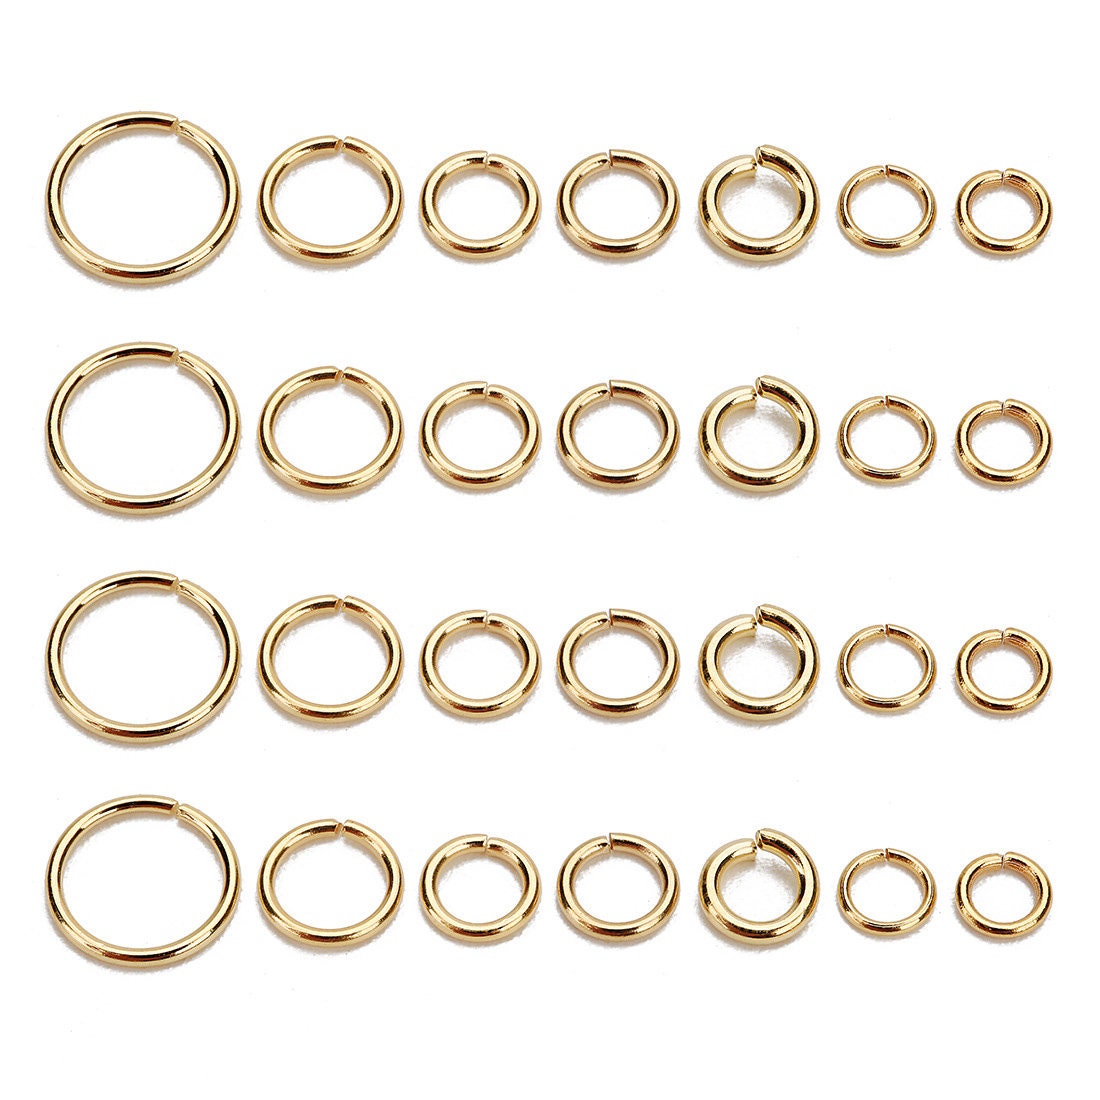 18K gold plated jump ring - 4mm, 5mm, 6mm or 8mm - 50pcs stainless steel jumprings - Jewelry making findings